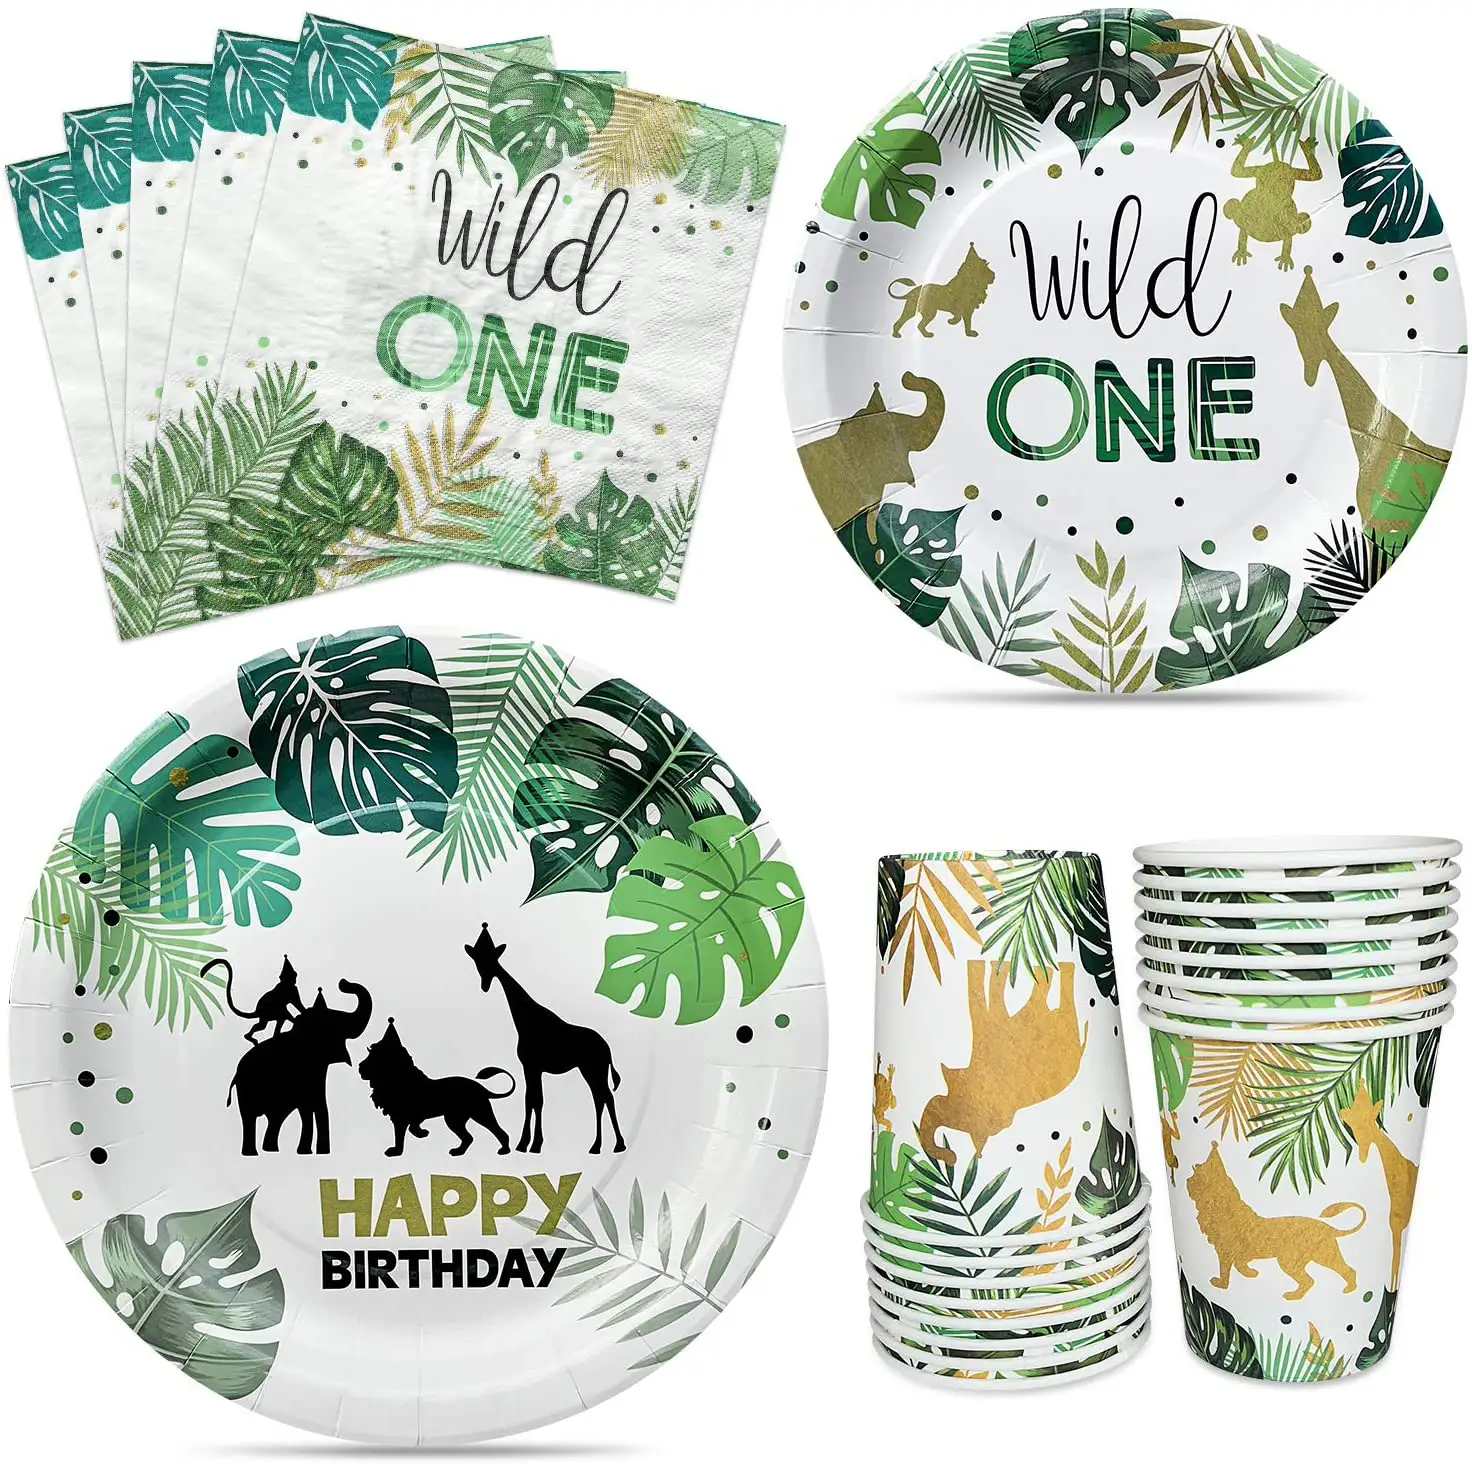 Customize tableware one year old baby birthday wild animal party supplies set